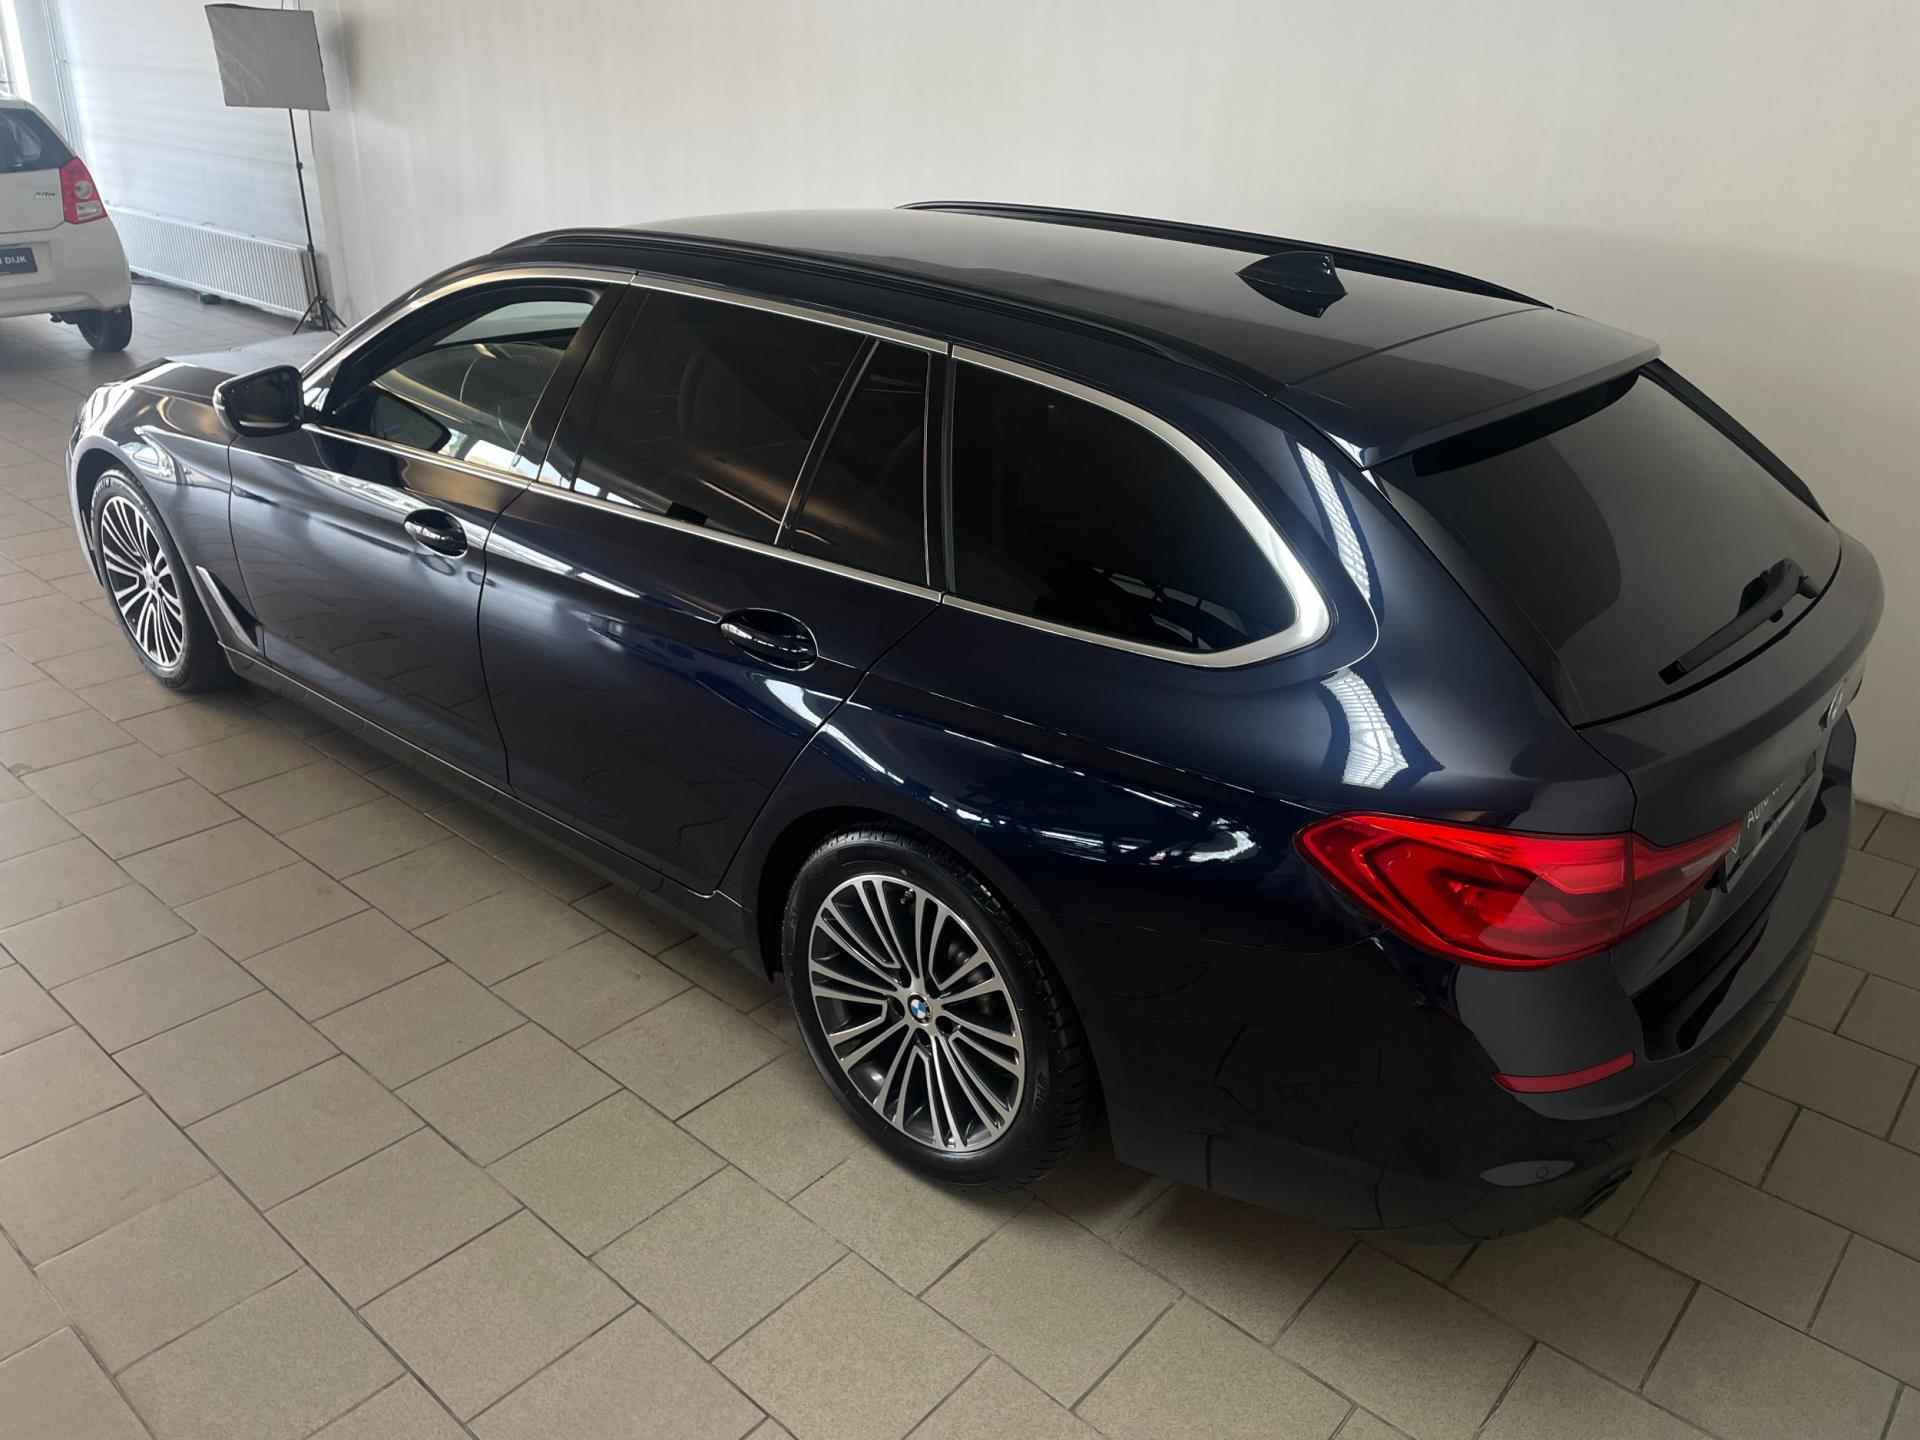 BMW 5-serie Touring 520i High Executive AUTOMAAT NAVI CRUISE BLUETOOTH LED VERL STUURVERW STOELVERW STOELVENT LEDER NIEUWSTAAT - 5/57